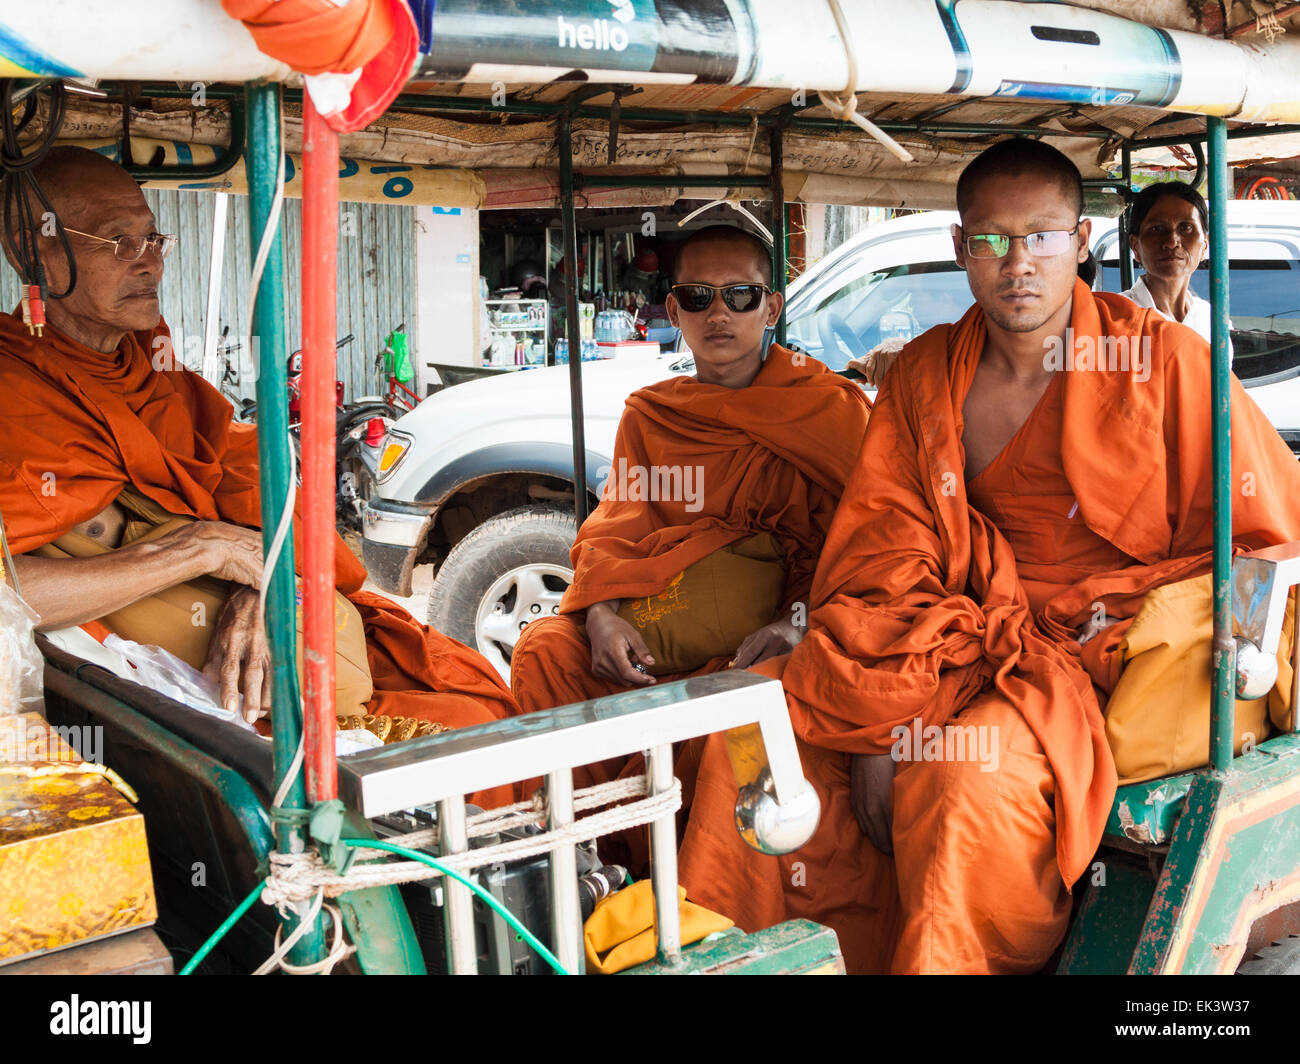 Buddhist monks waiting for alms near Kampot market in Cambodia, Asia. Stock Photo